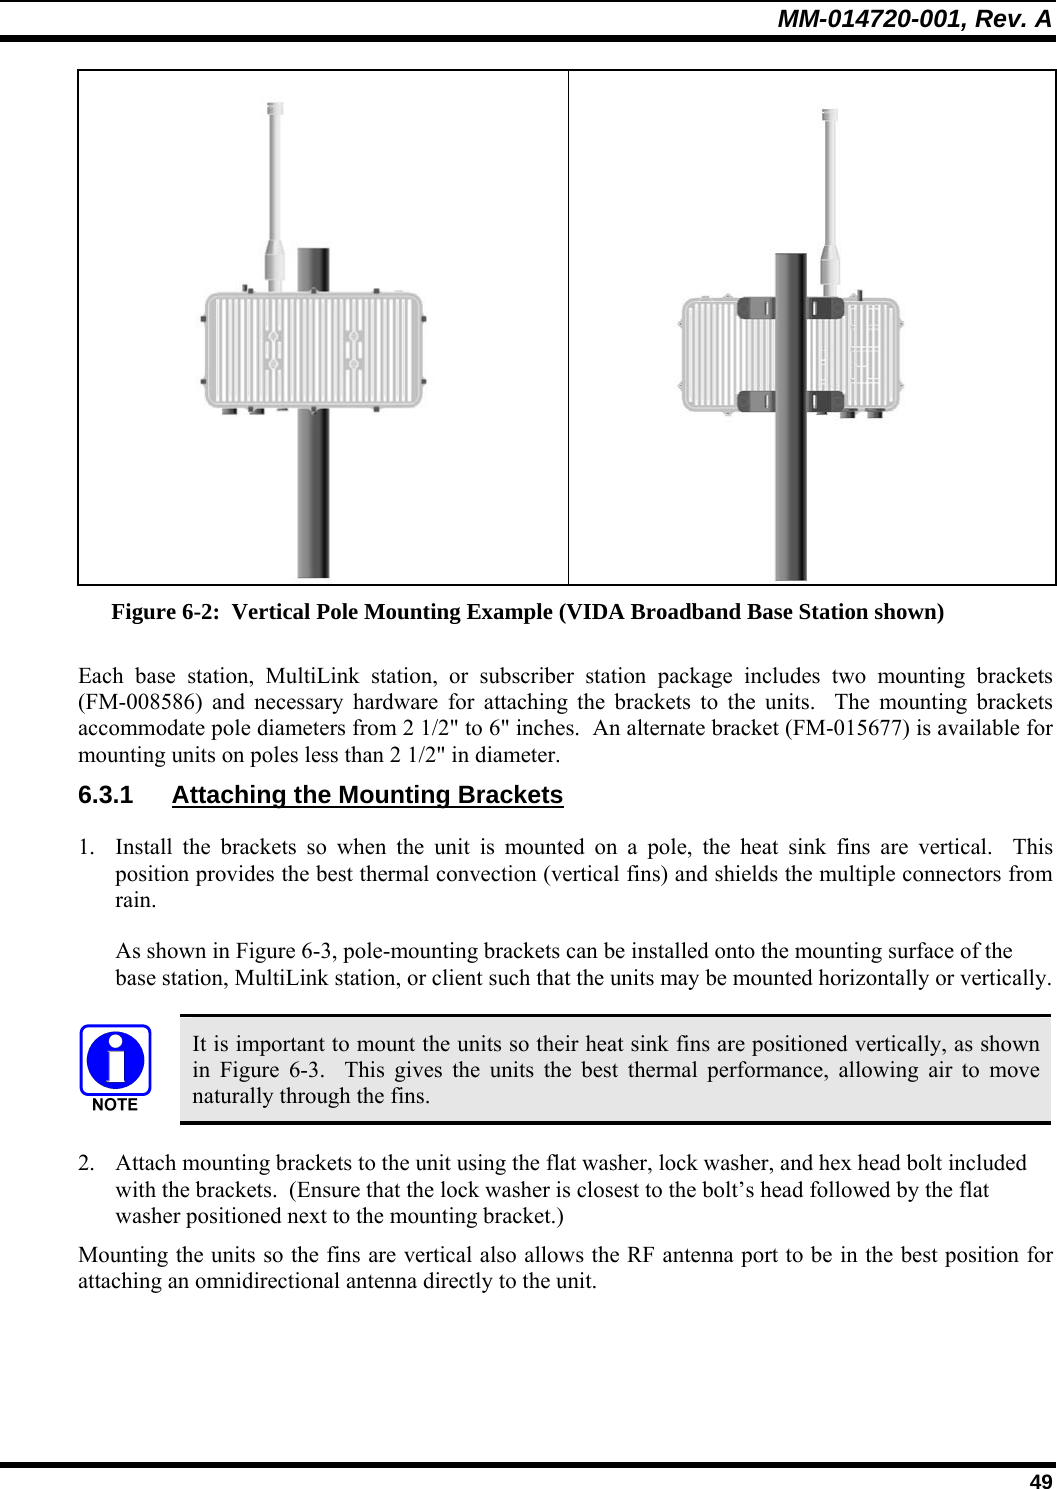 MM-014720-001, Rev. A  49   Figure 6-2:  Vertical Pole Mounting Example (VIDA Broadband Base Station shown) Each base station, MultiLink station, or subscriber station package includes two mounting brackets (FM-008586) and necessary hardware for attaching the brackets to the units.  The mounting brackets accommodate pole diameters from 2 1/2&quot; to 6&quot; inches.  An alternate bracket (FM-015677) is available for mounting units on poles less than 2 1/2&quot; in diameter. 6.3.1  Attaching the Mounting Brackets 1. Install the brackets so when the unit is mounted on a pole, the heat sink fins are vertical.  This position provides the best thermal convection (vertical fins) and shields the multiple connectors from rain. As shown in Figure 6-3, pole-mounting brackets can be installed onto the mounting surface of the base station, MultiLink station, or client such that the units may be mounted horizontally or vertically.   It is important to mount the units so their heat sink fins are positioned vertically, as shown in  Figure 6-3.  This gives the units the best thermal performance, allowing air to move naturally through the fins. 2. Attach mounting brackets to the unit using the flat washer, lock washer, and hex head bolt included with the brackets.  (Ensure that the lock washer is closest to the bolt’s head followed by the flat washer positioned next to the mounting bracket.) Mounting the units so the fins are vertical also allows the RF antenna port to be in the best position for attaching an omnidirectional antenna directly to the unit.  